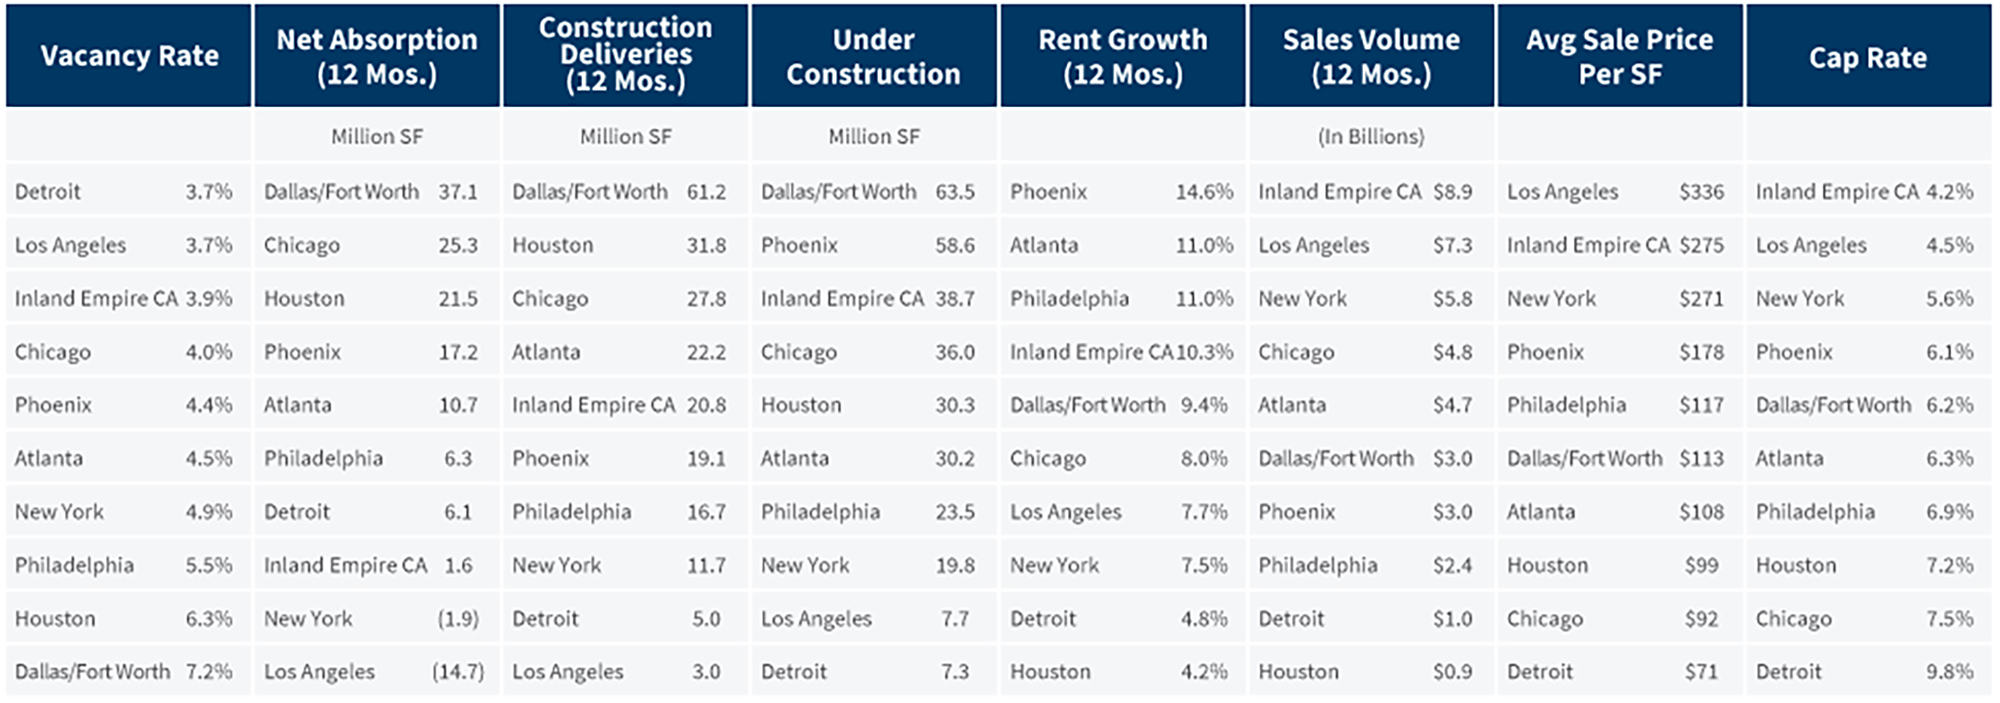 10 Largest Industrial Markets (by Inventory) Comparison